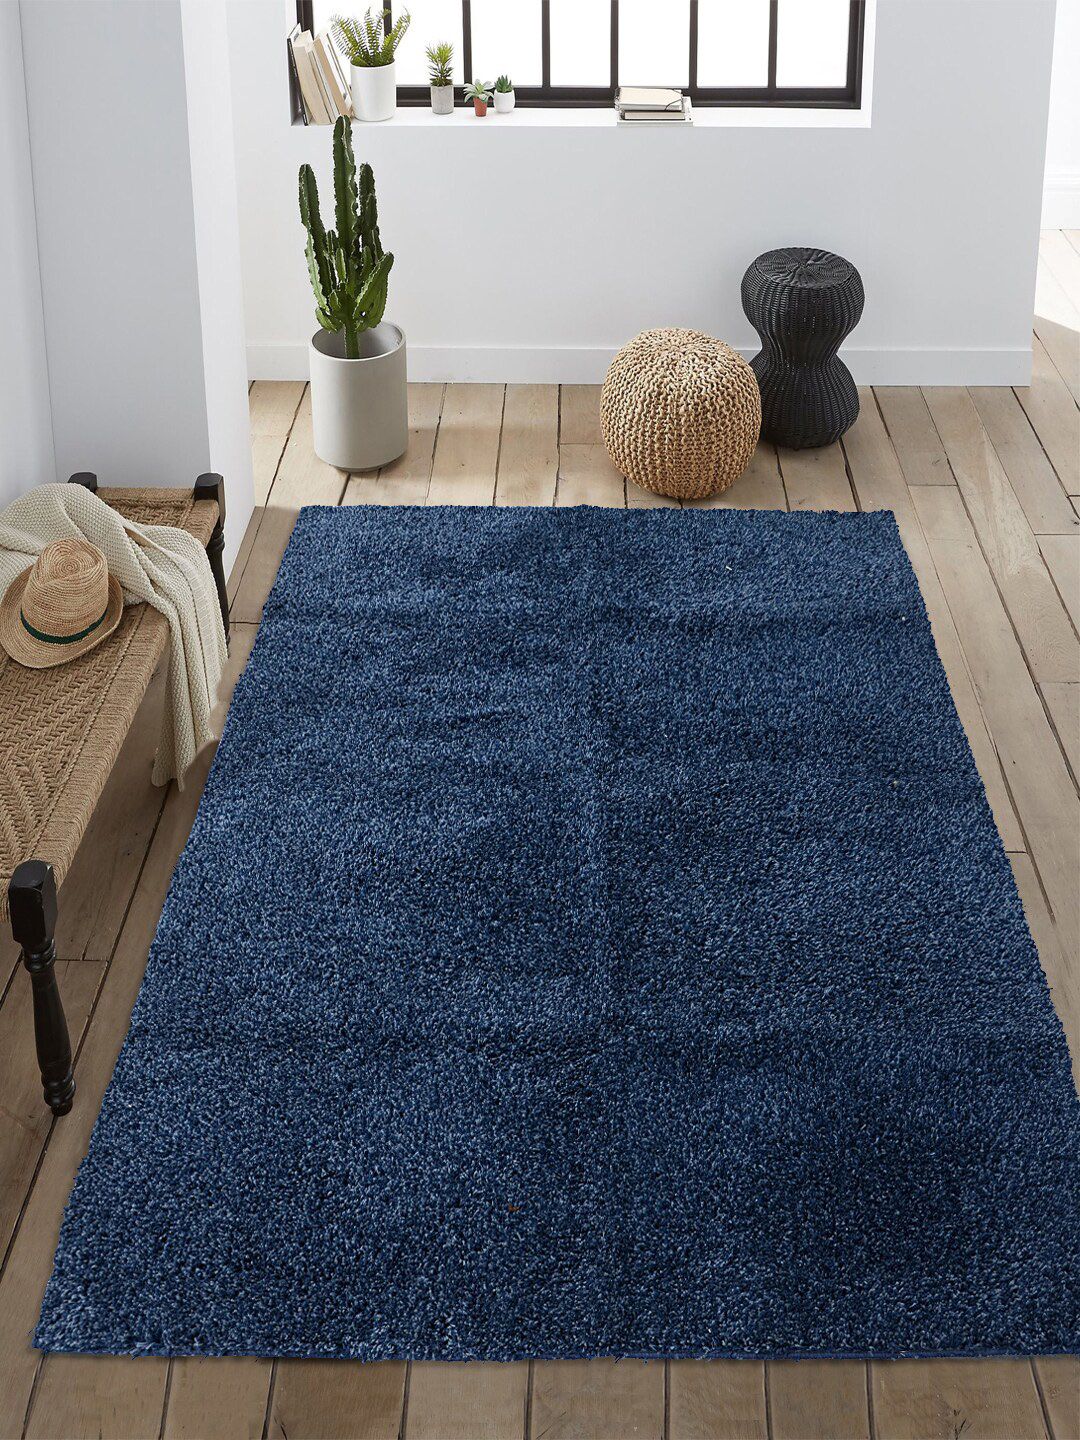 Saral Home Blue Solid Anti-Skid Carpet Price in India